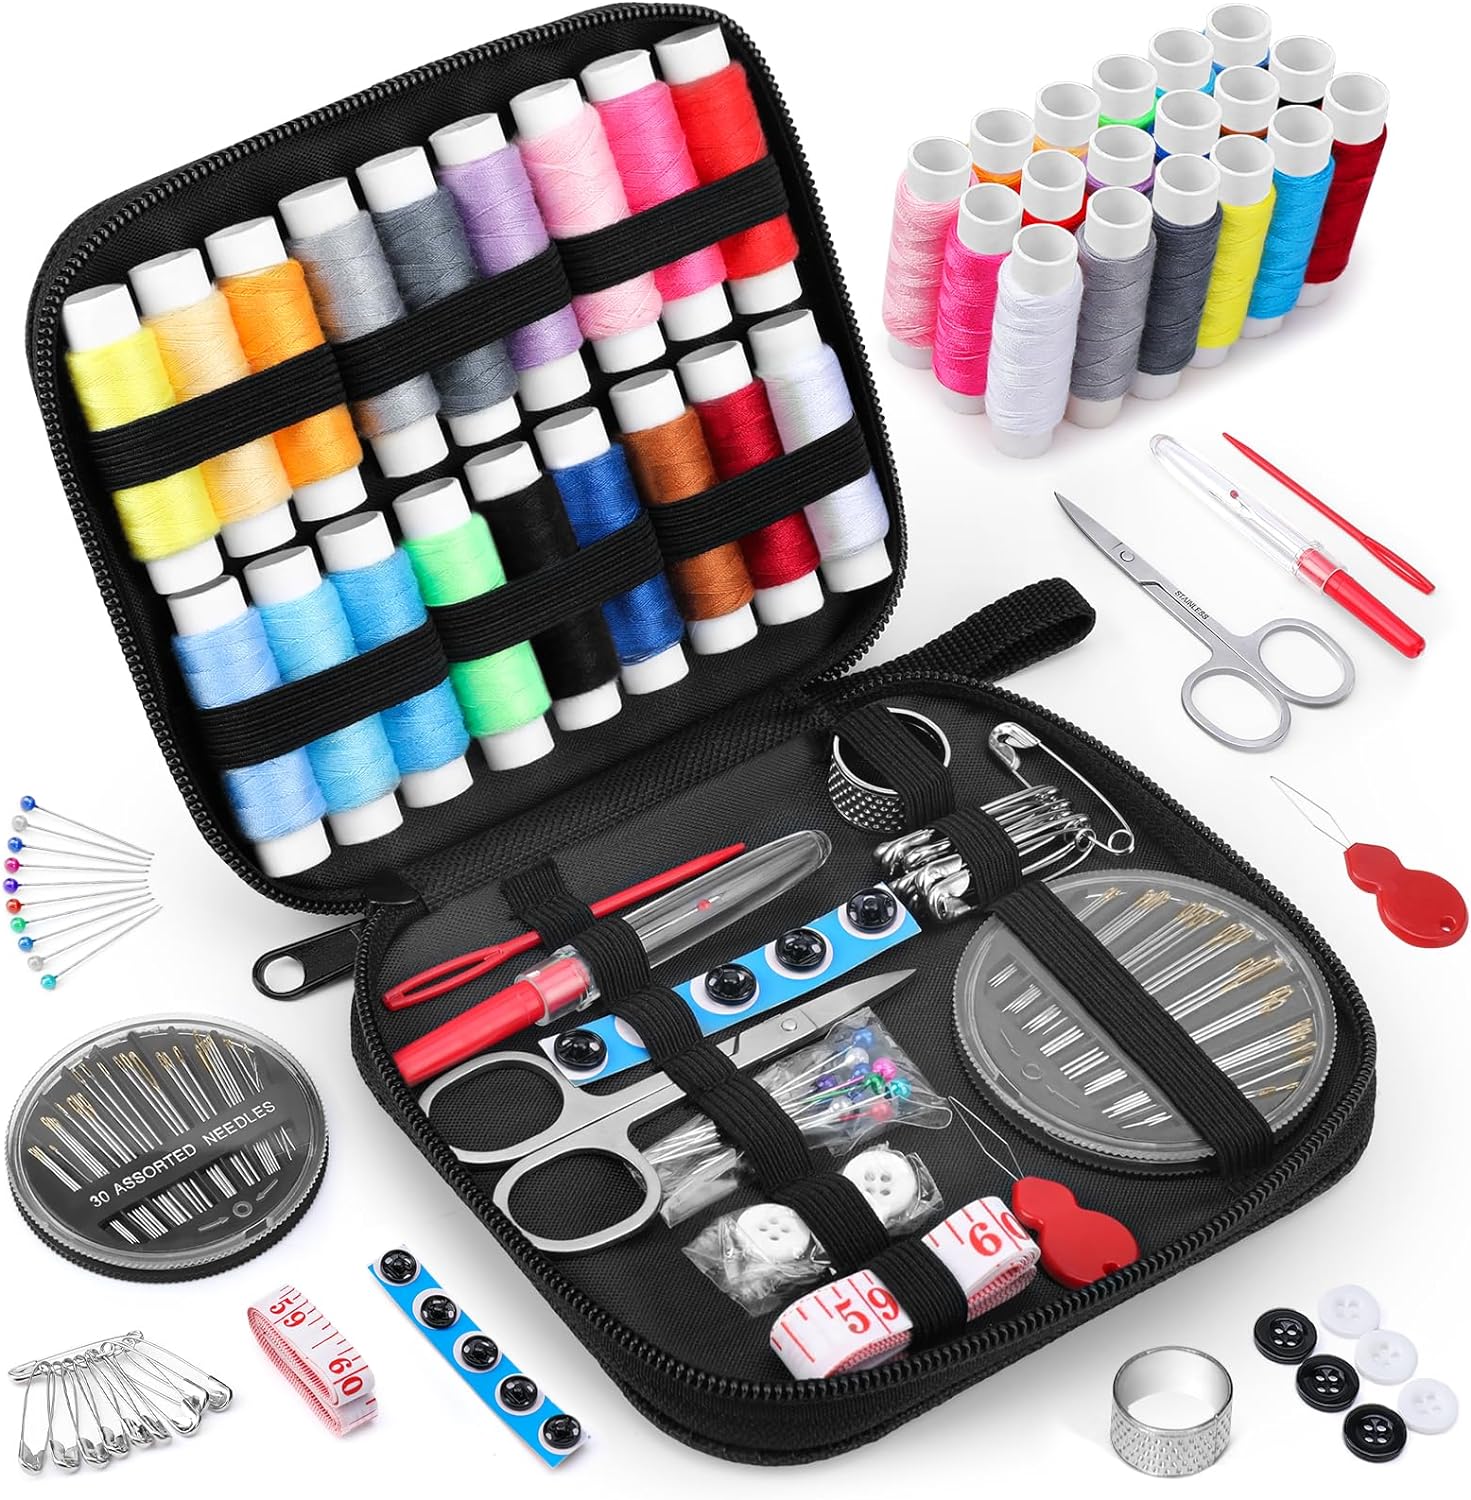 85pcs Portable Sewing Kit Gifts with Case for Grandma Mom Kids